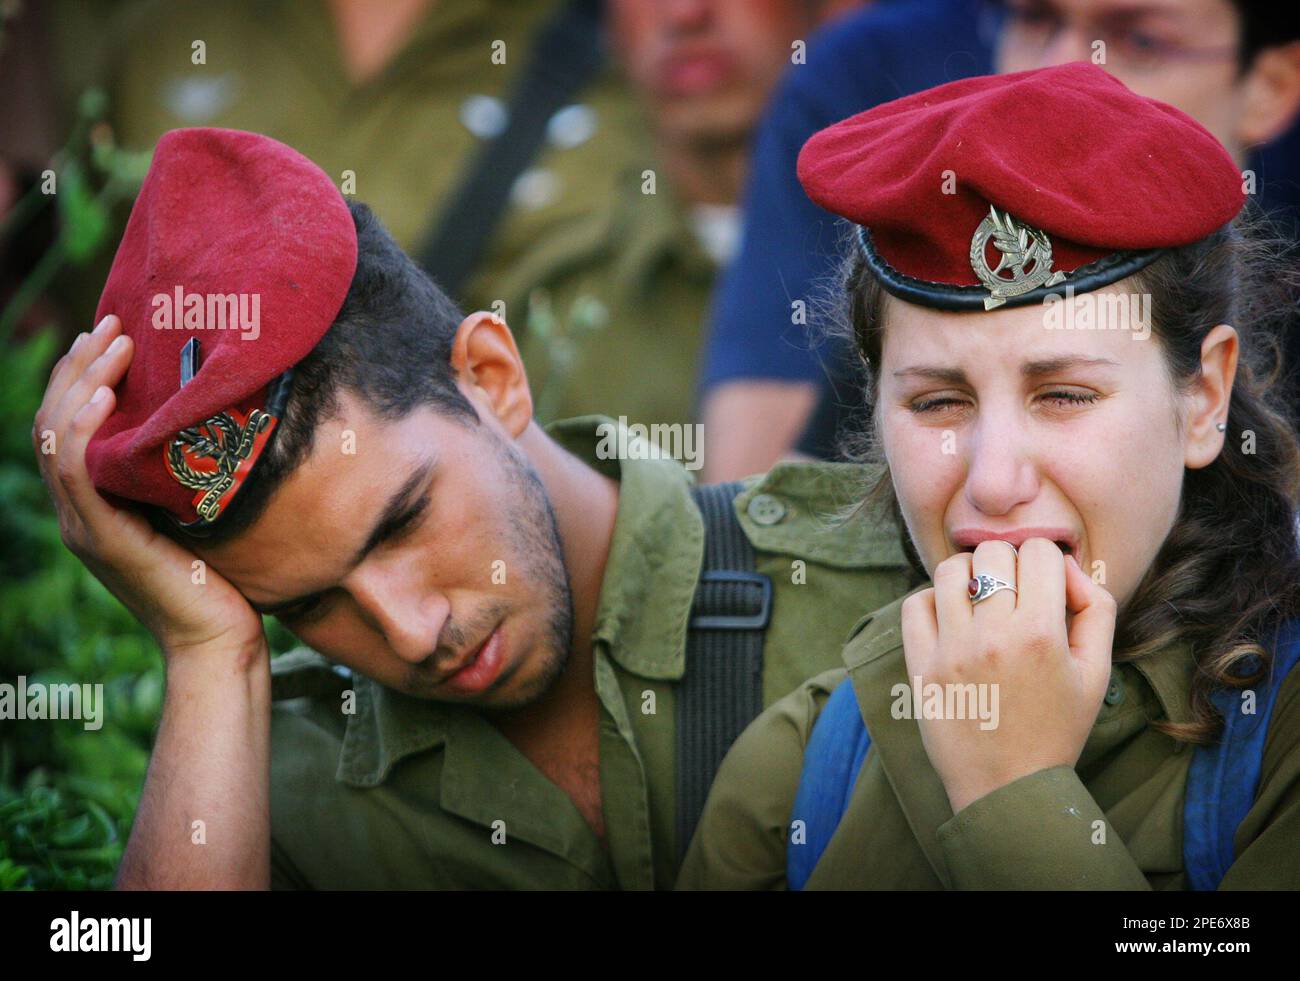 Israeli soldiers cry during the funeral of their 21-year-old comrade Dan Talasnikov at the cemetery of the southern Israeli town of Nir Galim Monday May 2, 2005. Talasnikovwas killed when Israeli troops raided the Palestinian West Bank village of Seideh near Tulkarem before dawn Monday and imposed a curfew. A shootout erupted, leaving a militant and the soldier dead.(AP Photo/Ariel Schalit) Stock Photo